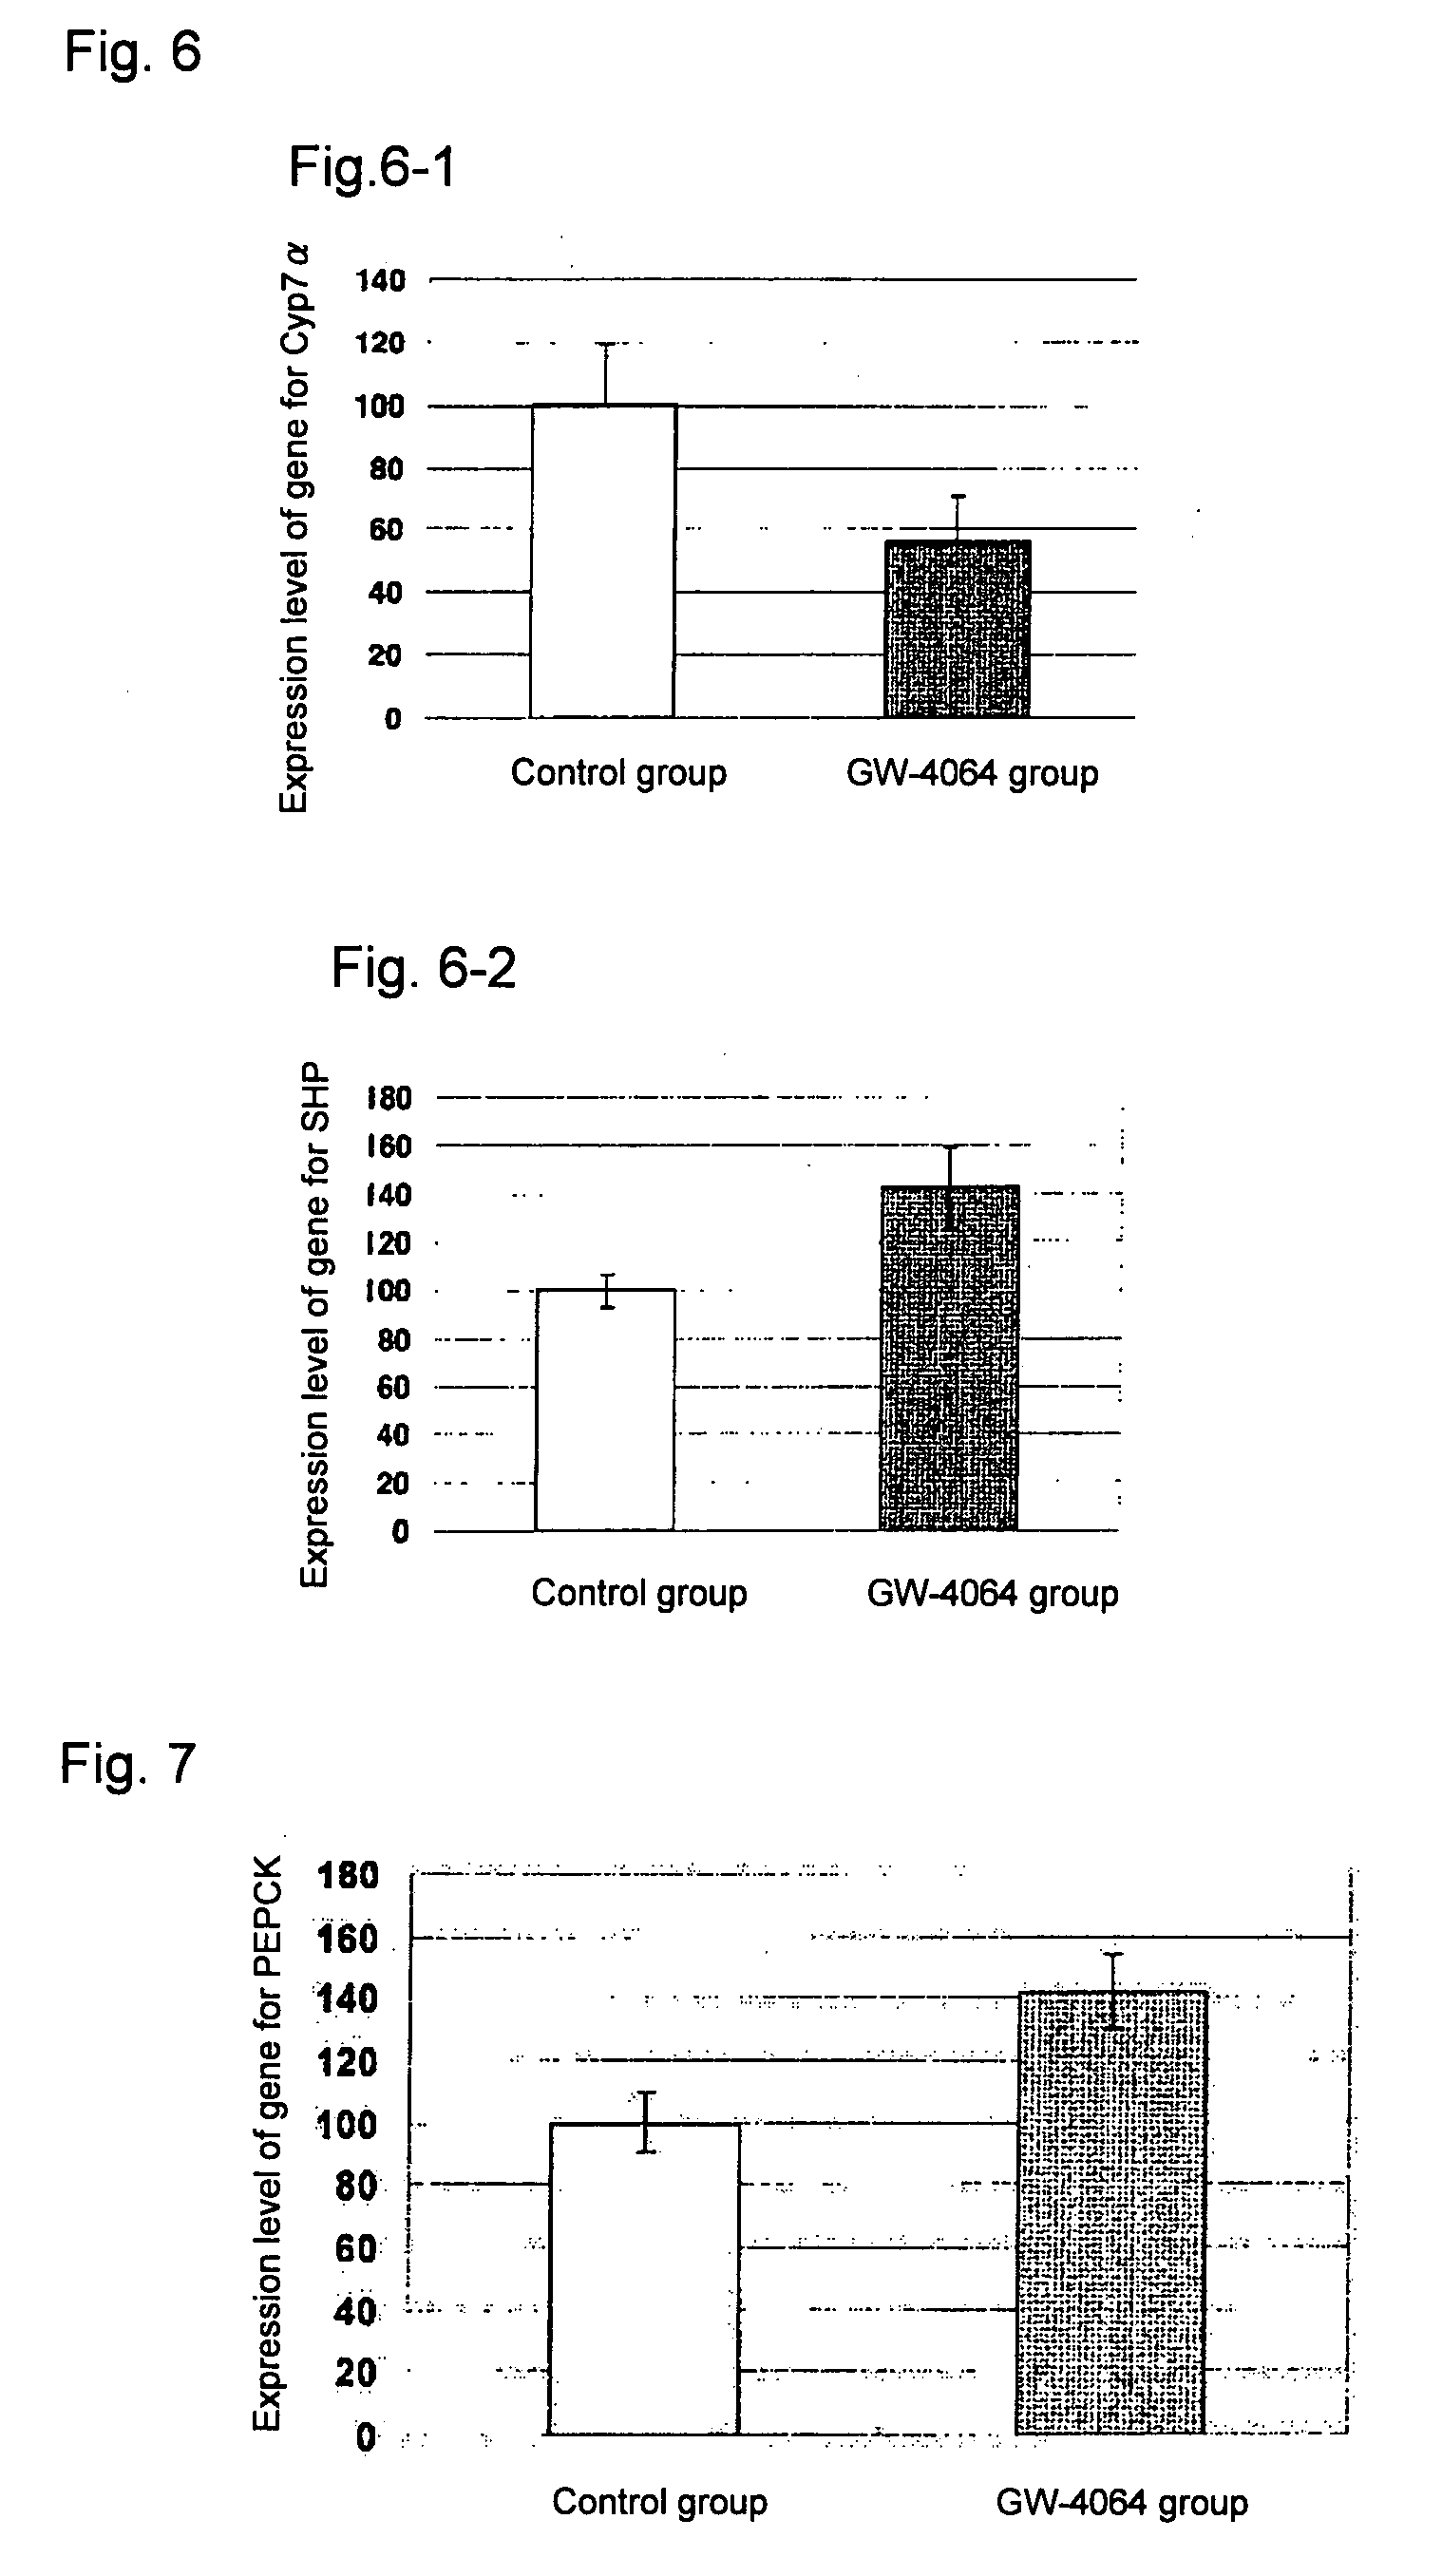 Agent for prophylactic and/or therapeutic treatment of diabetes